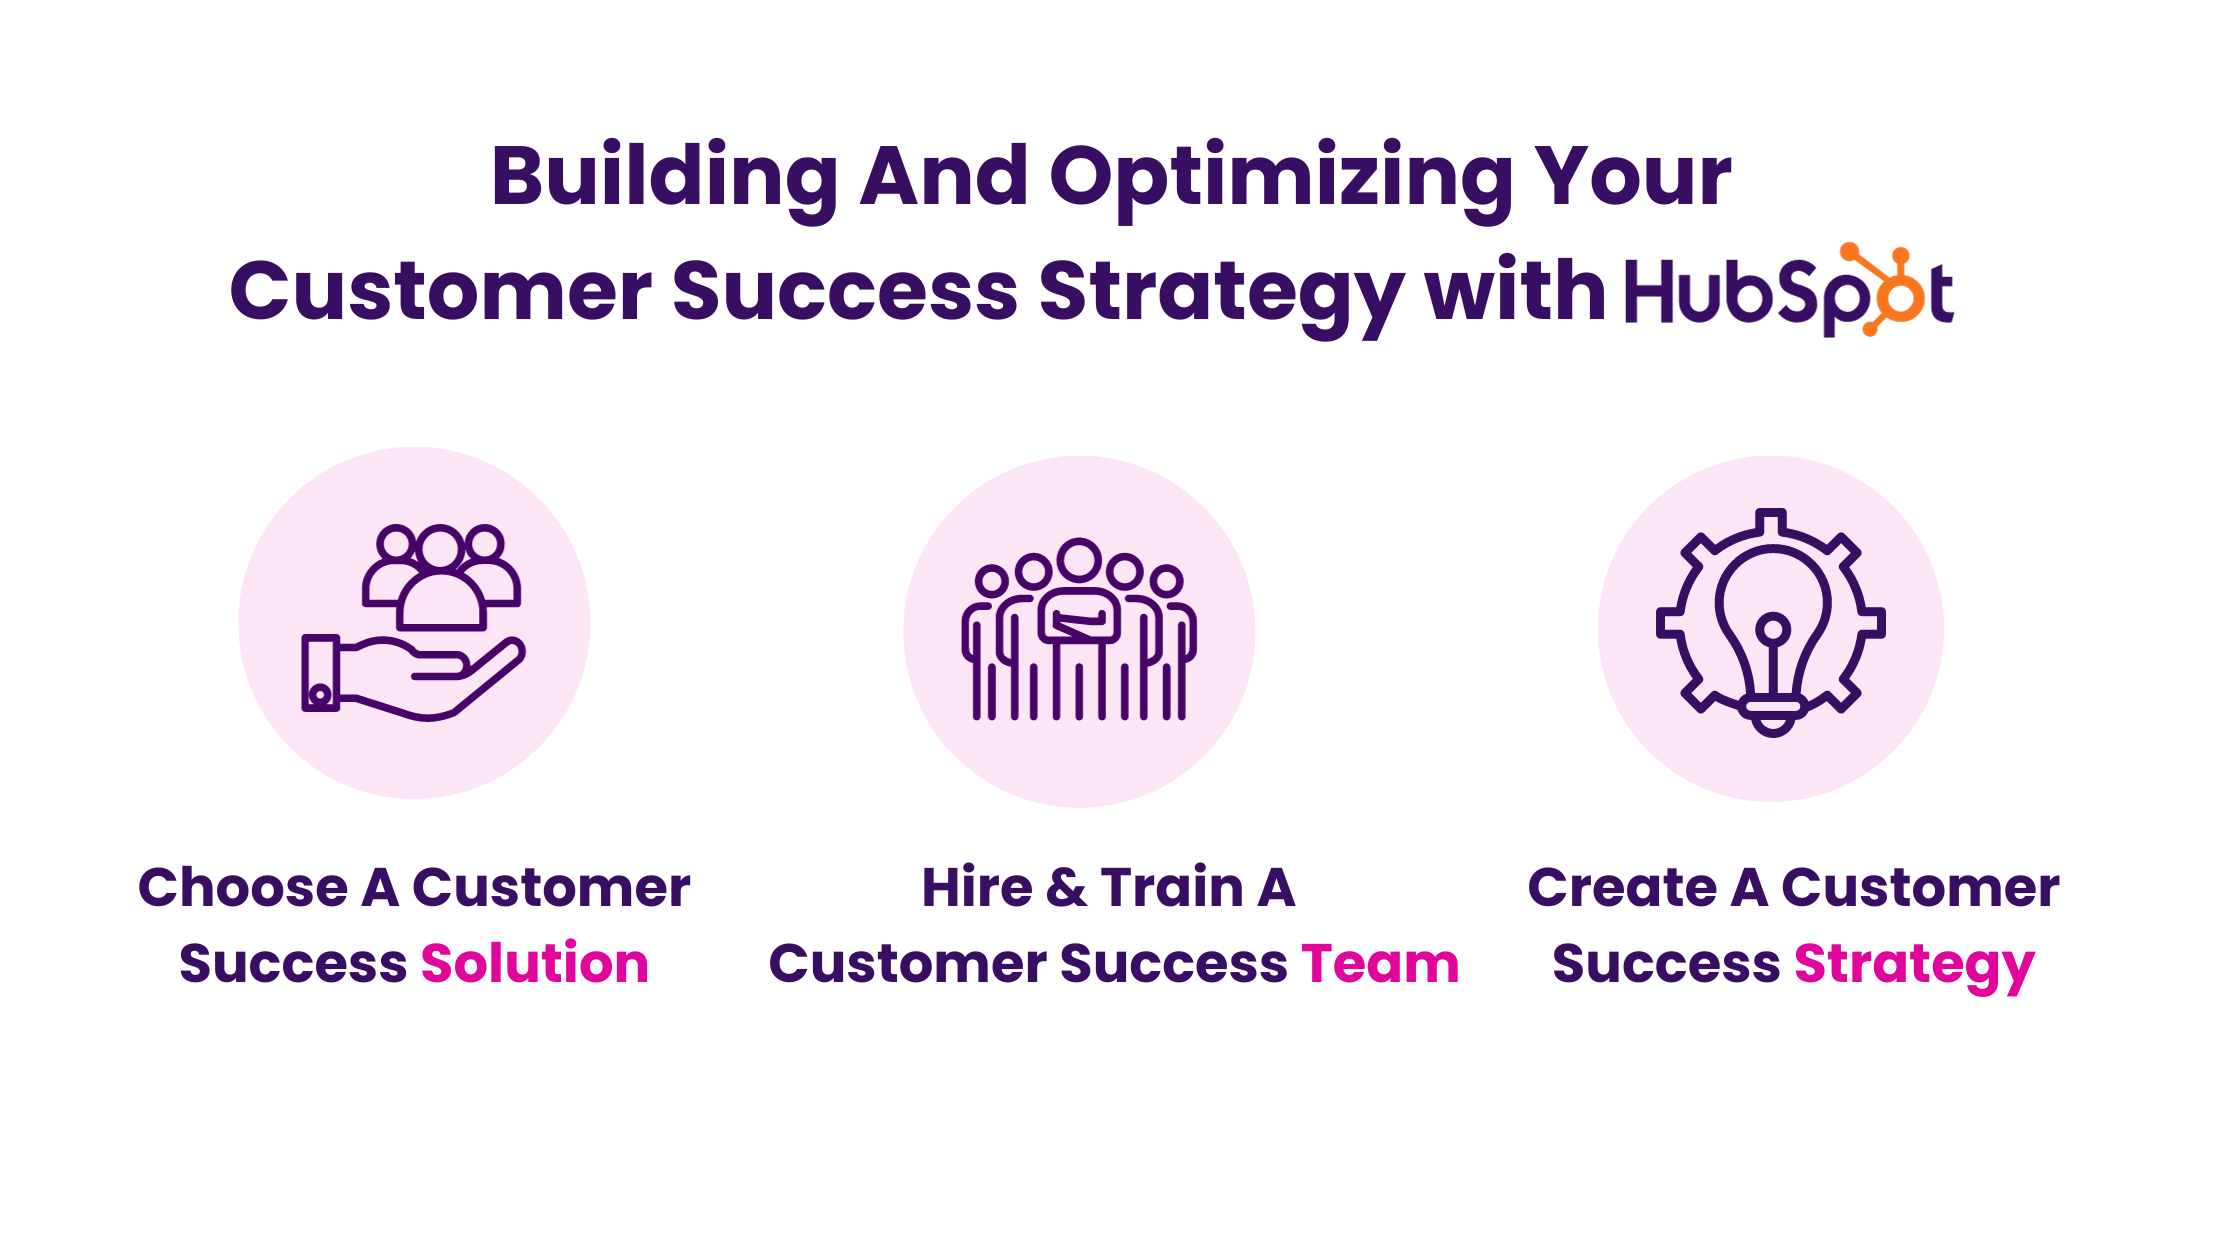 Building and Optimizing Your Customer Success Strategy with